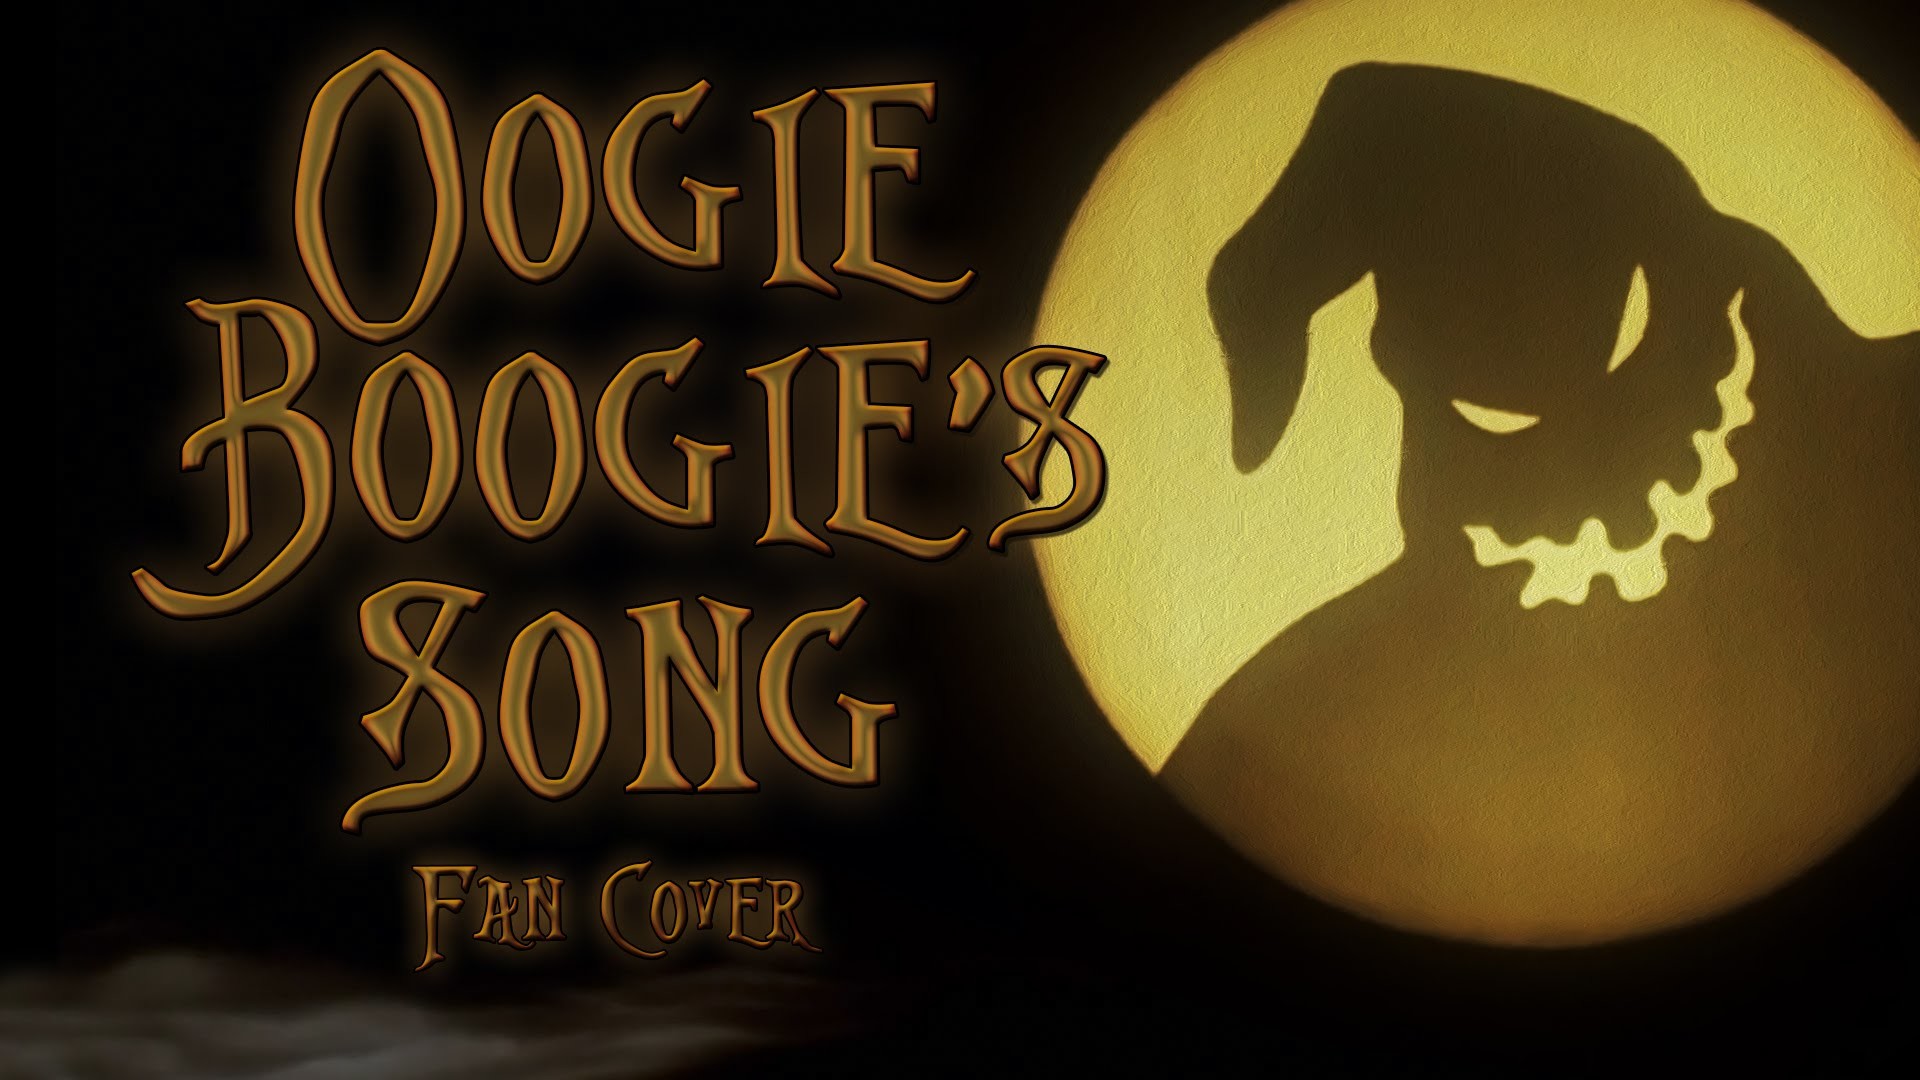 1920x1080 Oogie Boogie Song - The Nightmare Before Christmas fan cover (Disney  Villain Month) [RtG]